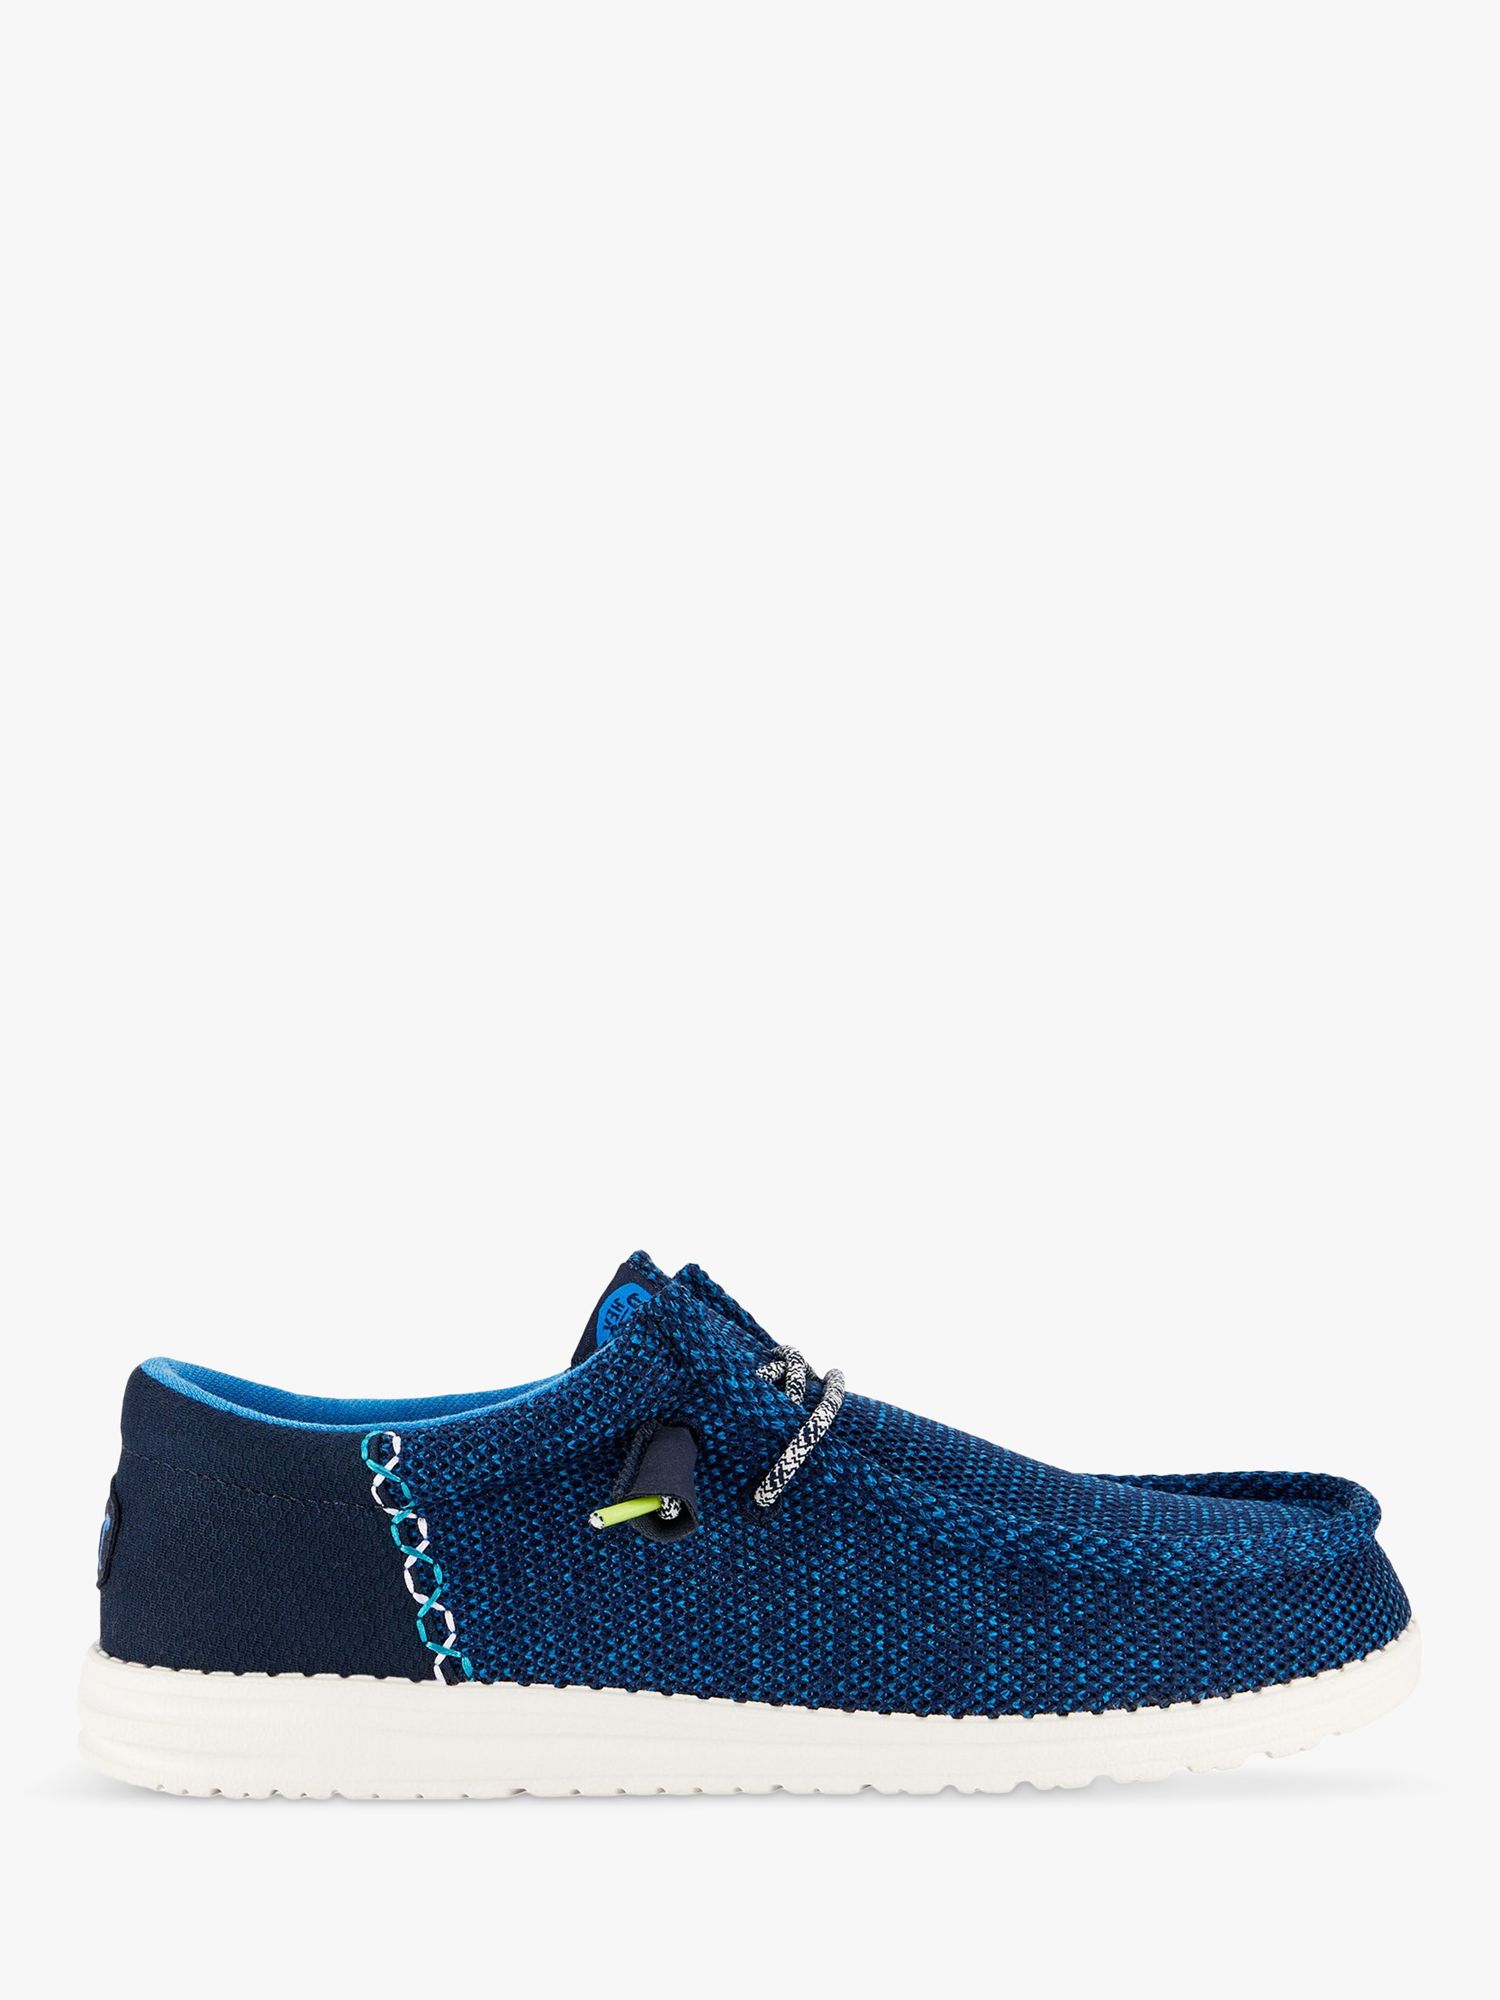 Hey Dude Wally Funk Open Mesh Shoes, Blue at John Lewis & Partners